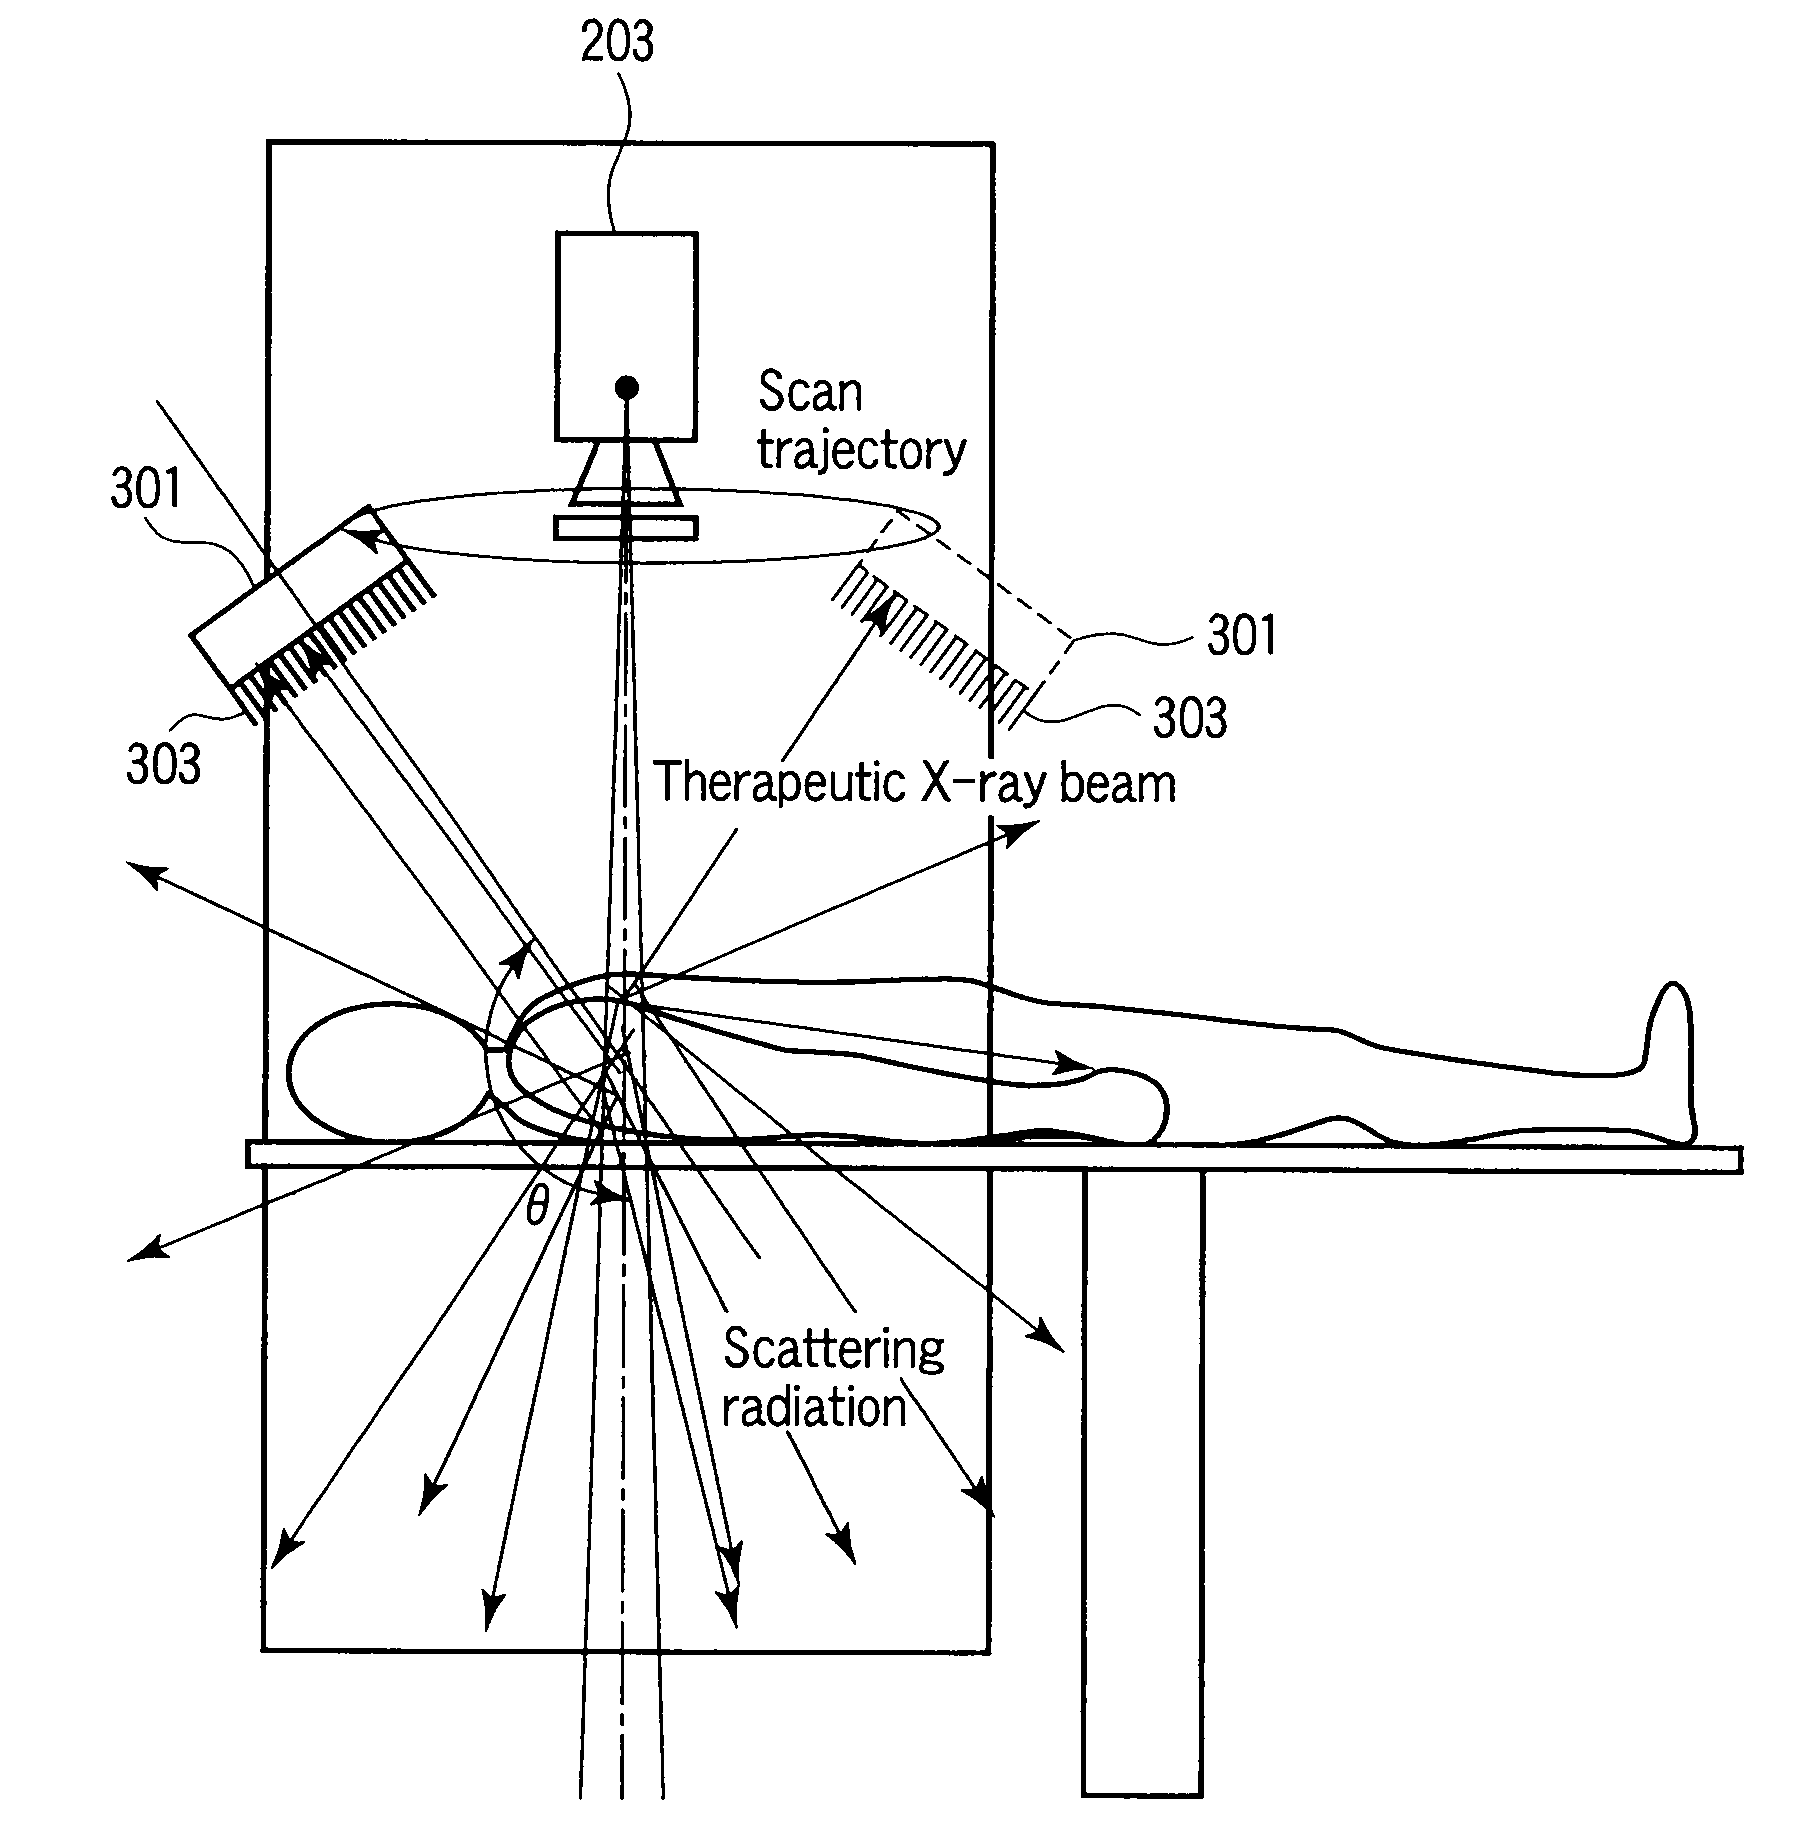 Radiotherapy support apparatus